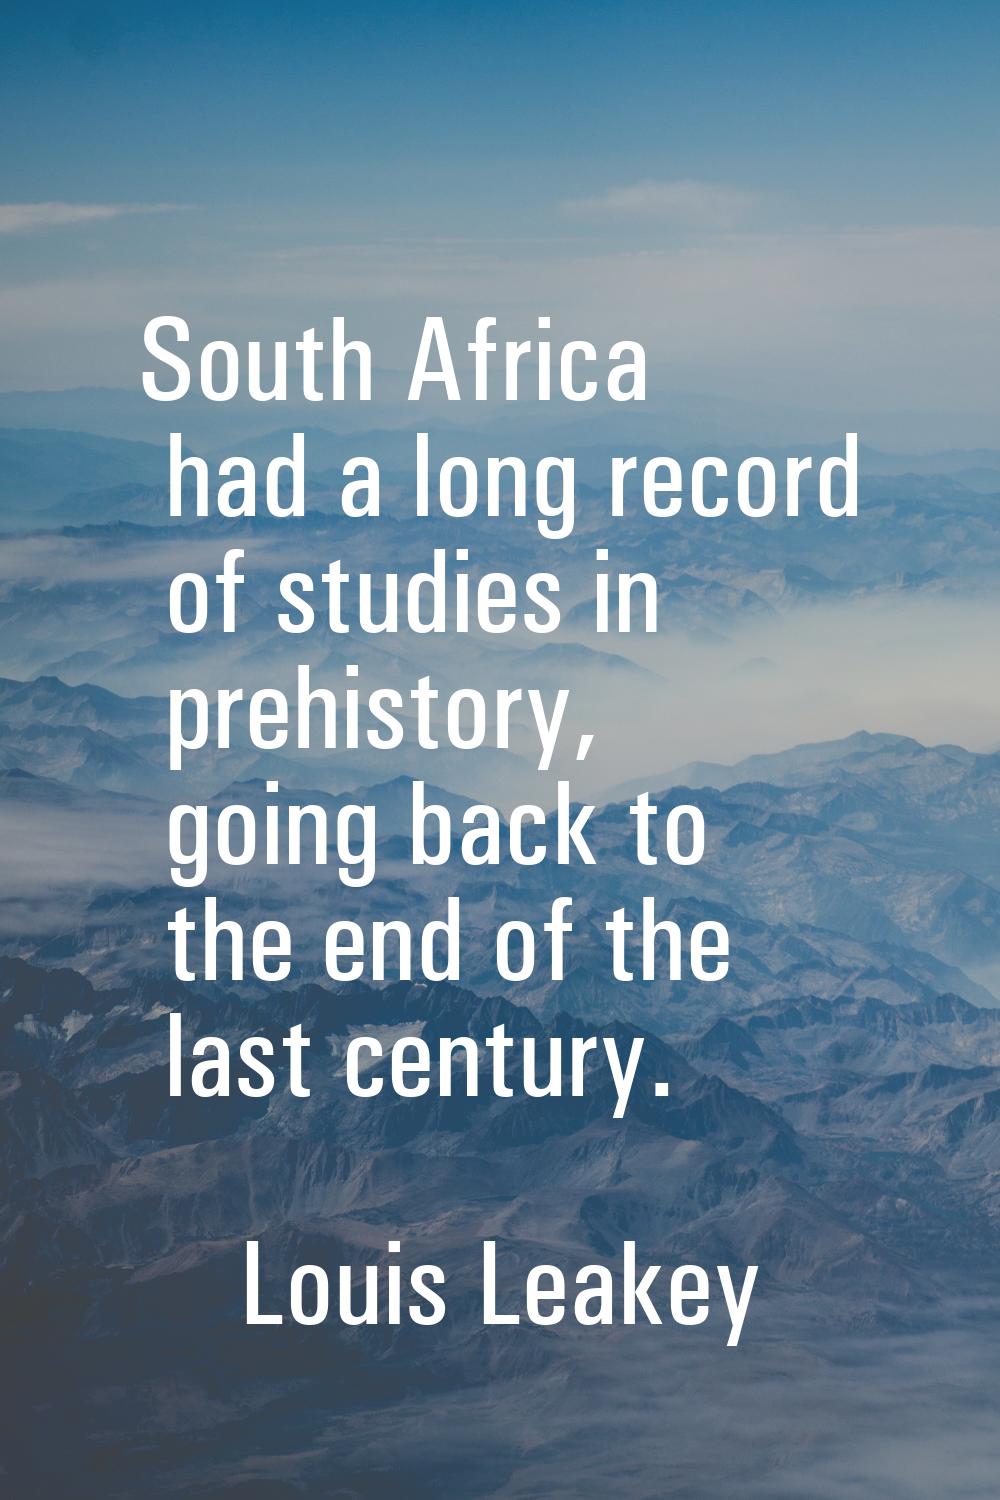 South Africa had a long record of studies in prehistory, going back to the end of the last century.